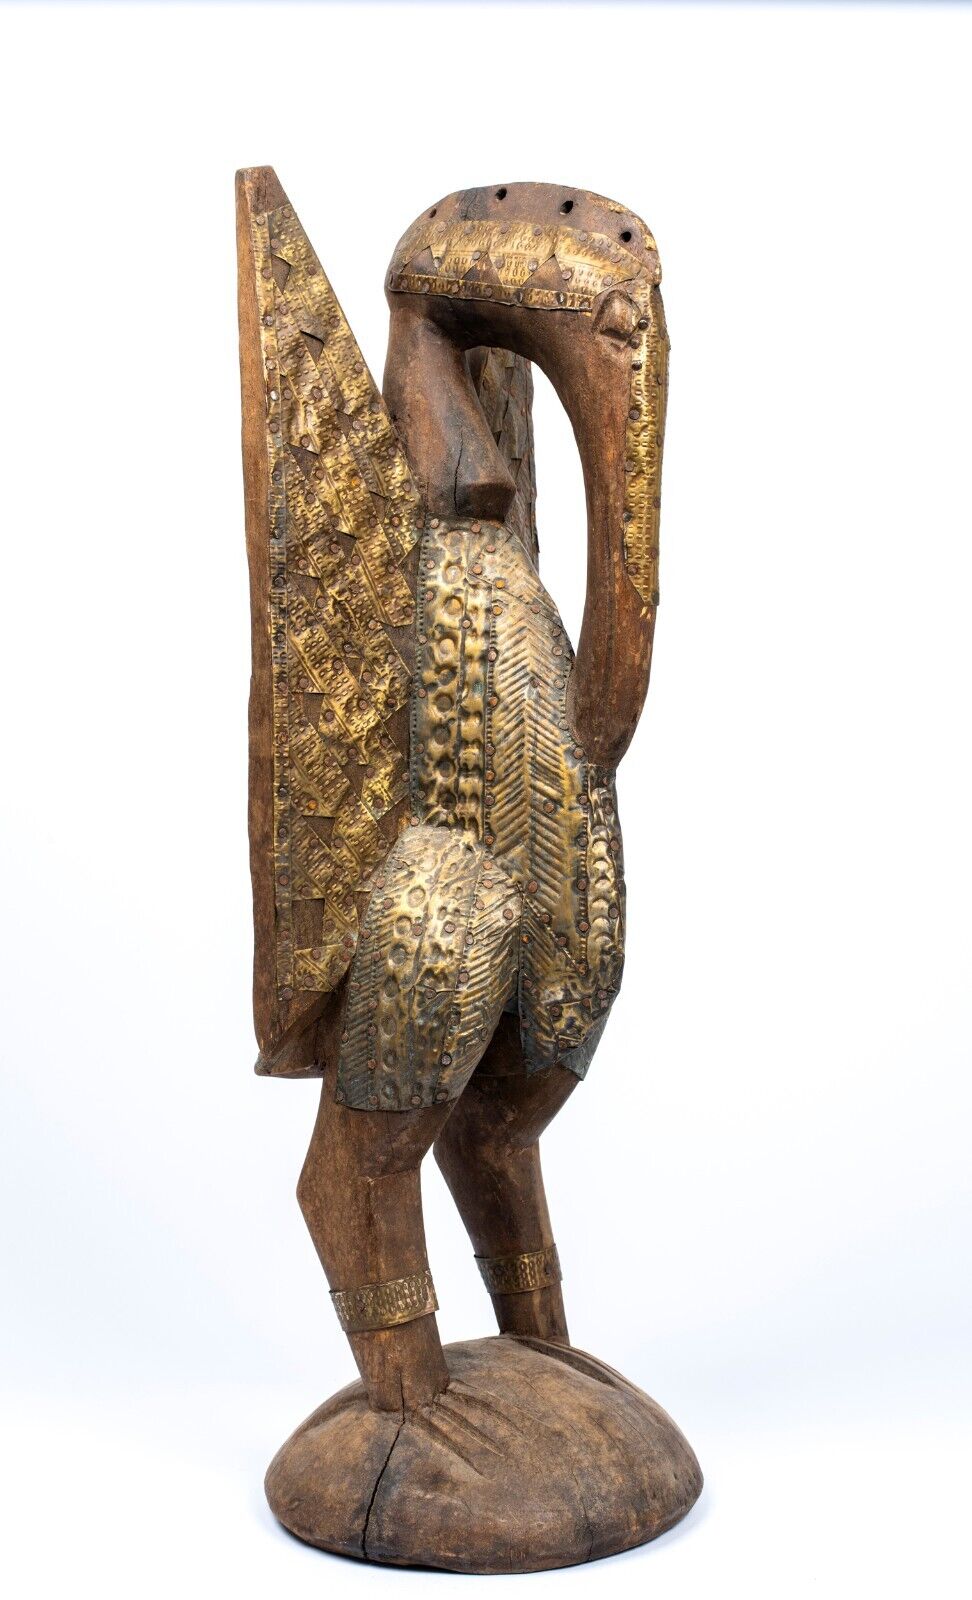 A West African Metal and Wood Bird Figure, Senufo Style